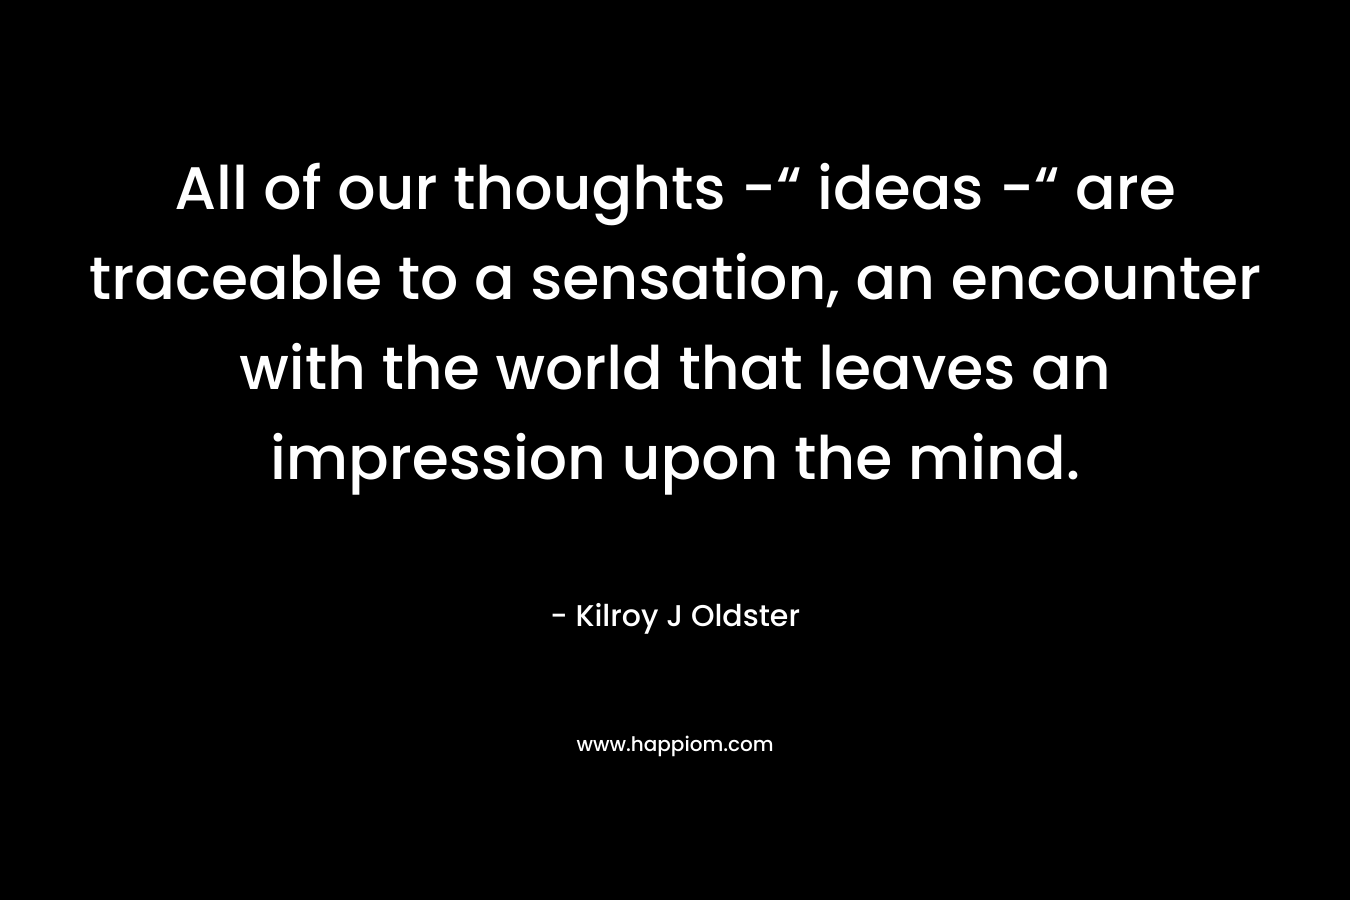 All of our thoughts -“ ideas -“ are traceable to a sensation, an encounter with the world that leaves an impression upon the mind.